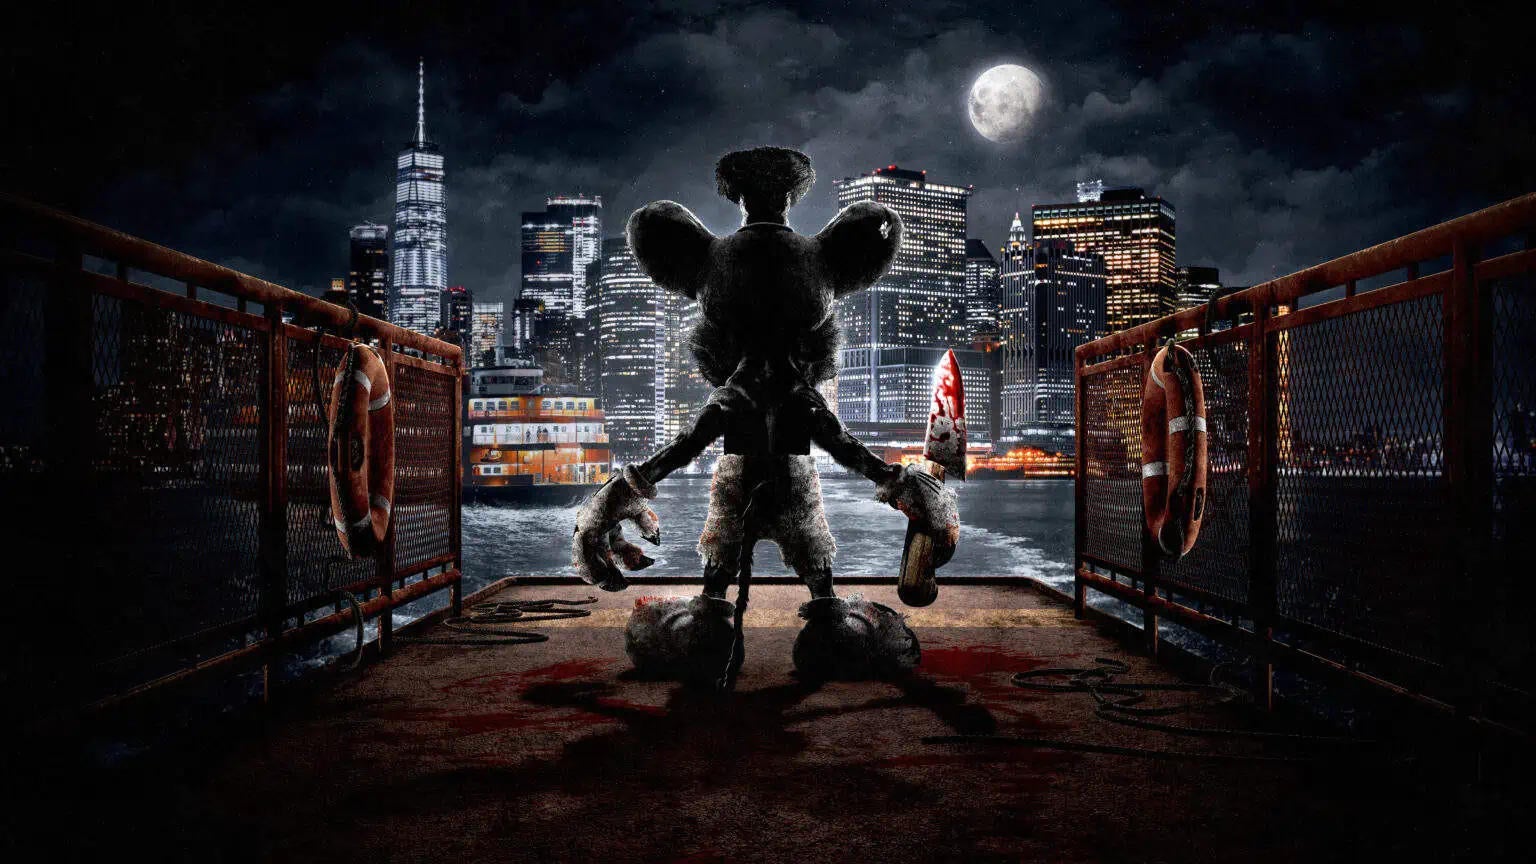 screamboat-steamboat-willie-horror-parody-poster-image